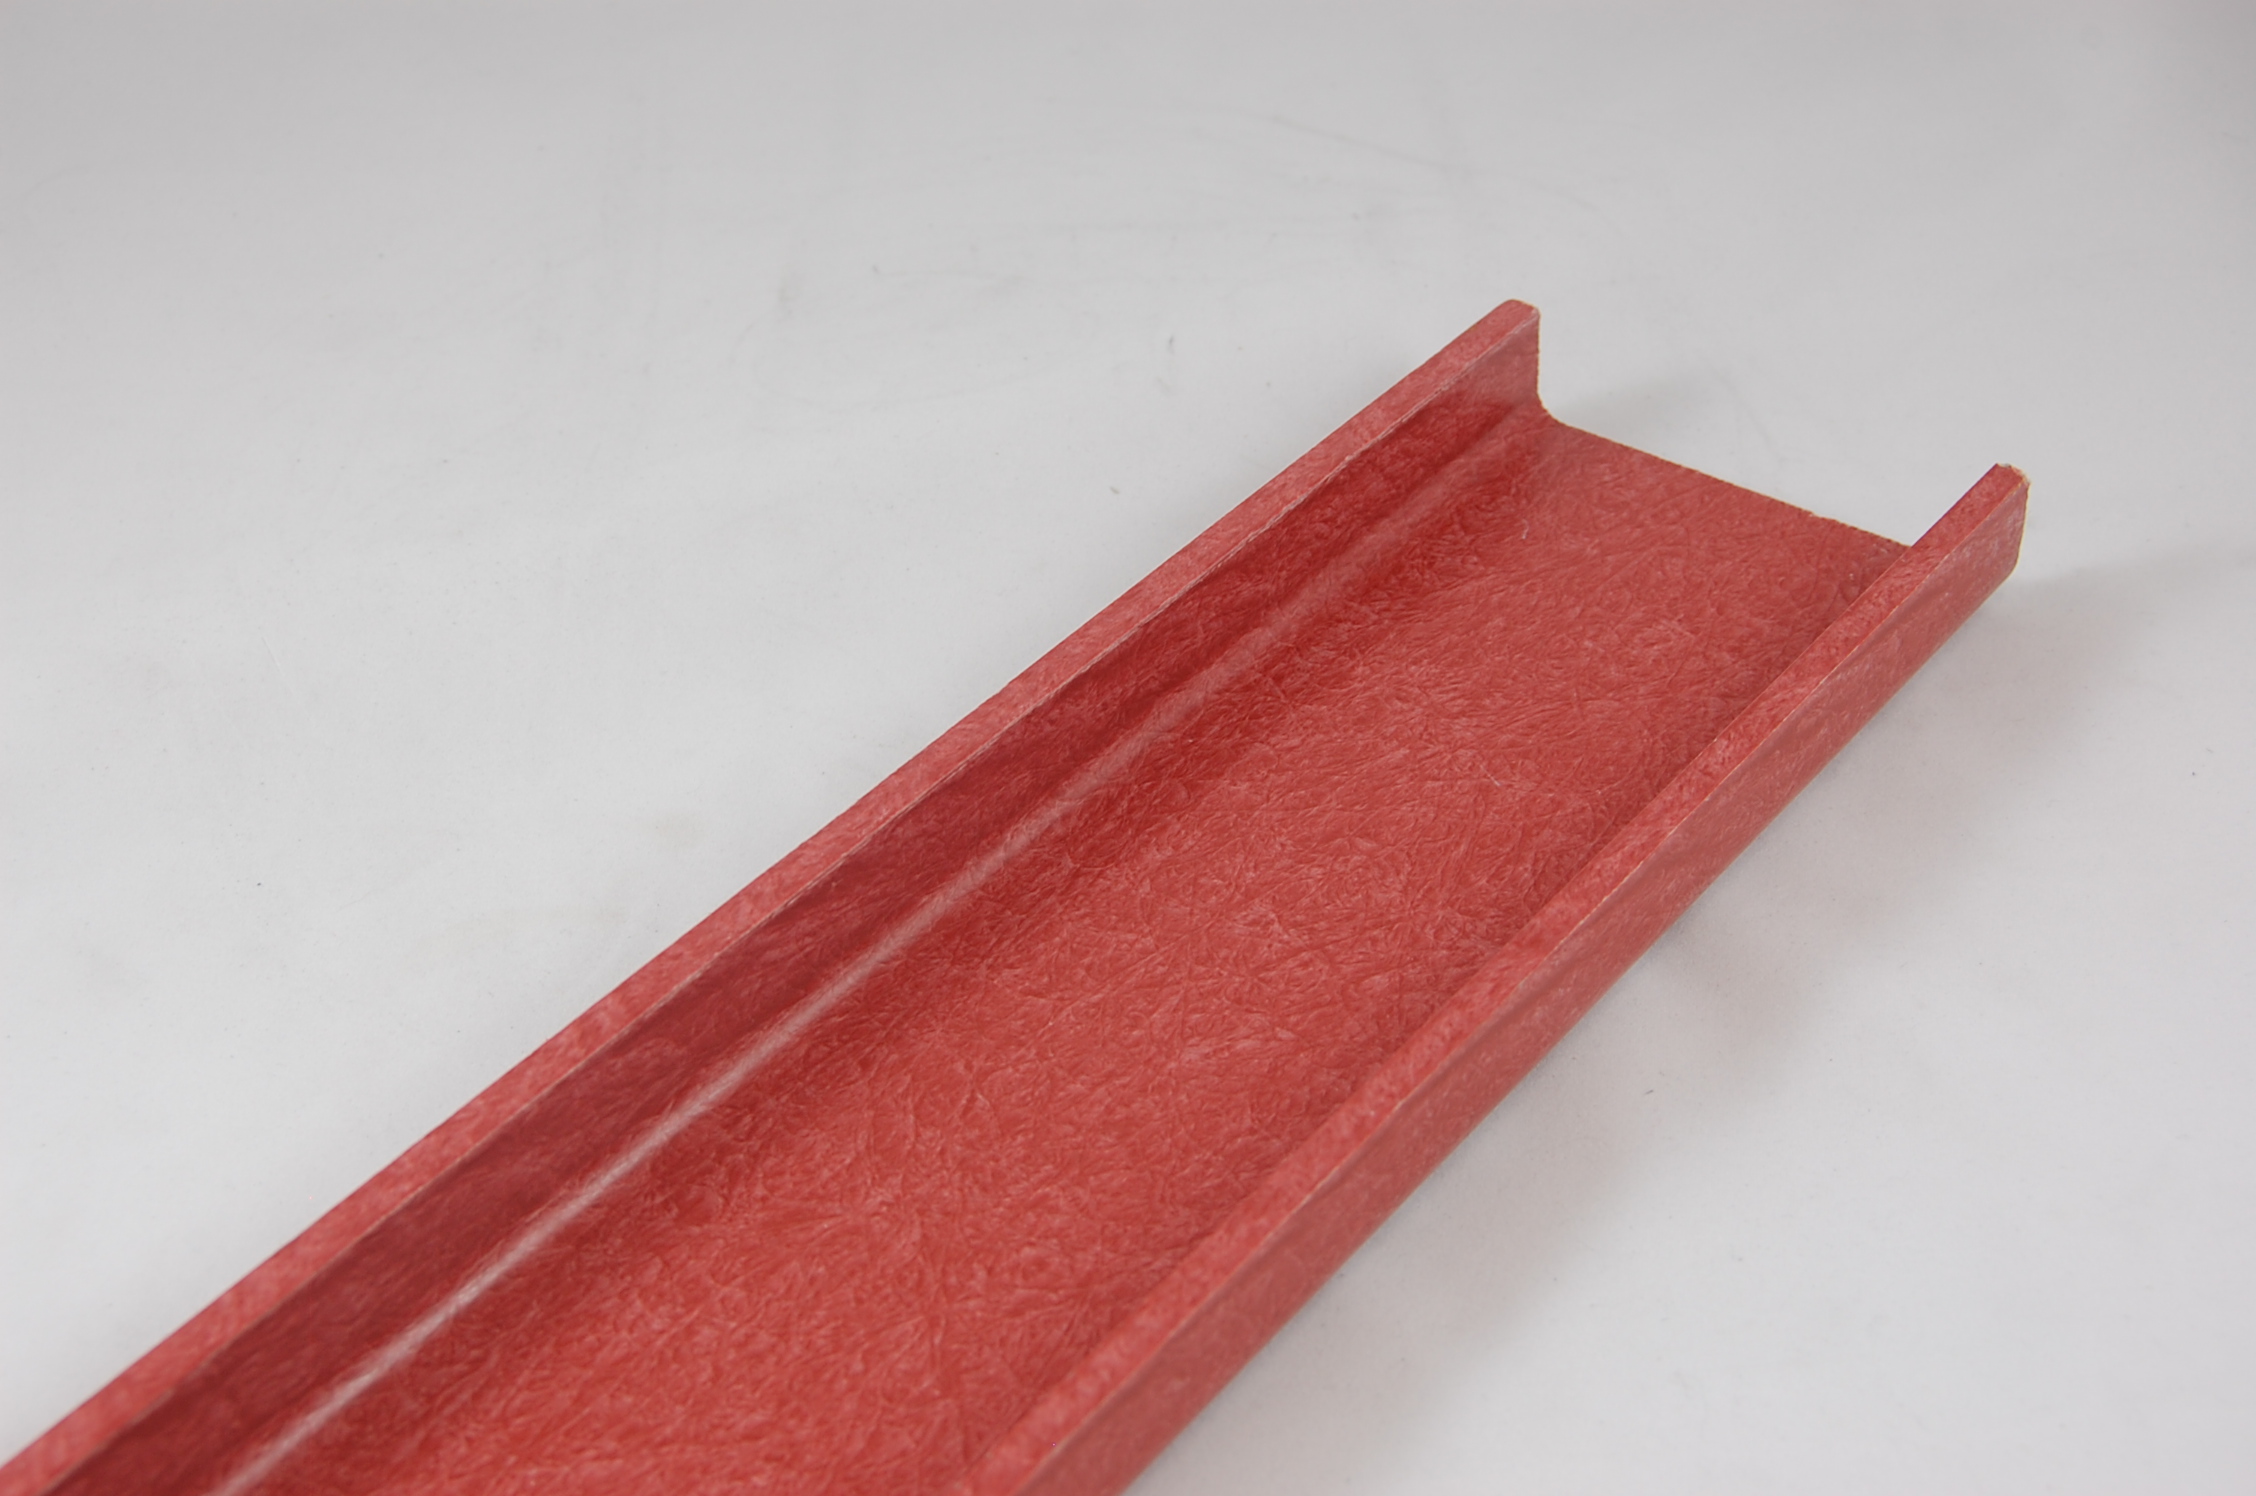 9-21/32"W x 1-5/8" Leg x 1/8" thick GLASROD® Grade 1130 Fiberglass-Reinforced Polyester Laminate Channel, red,  120"L channel